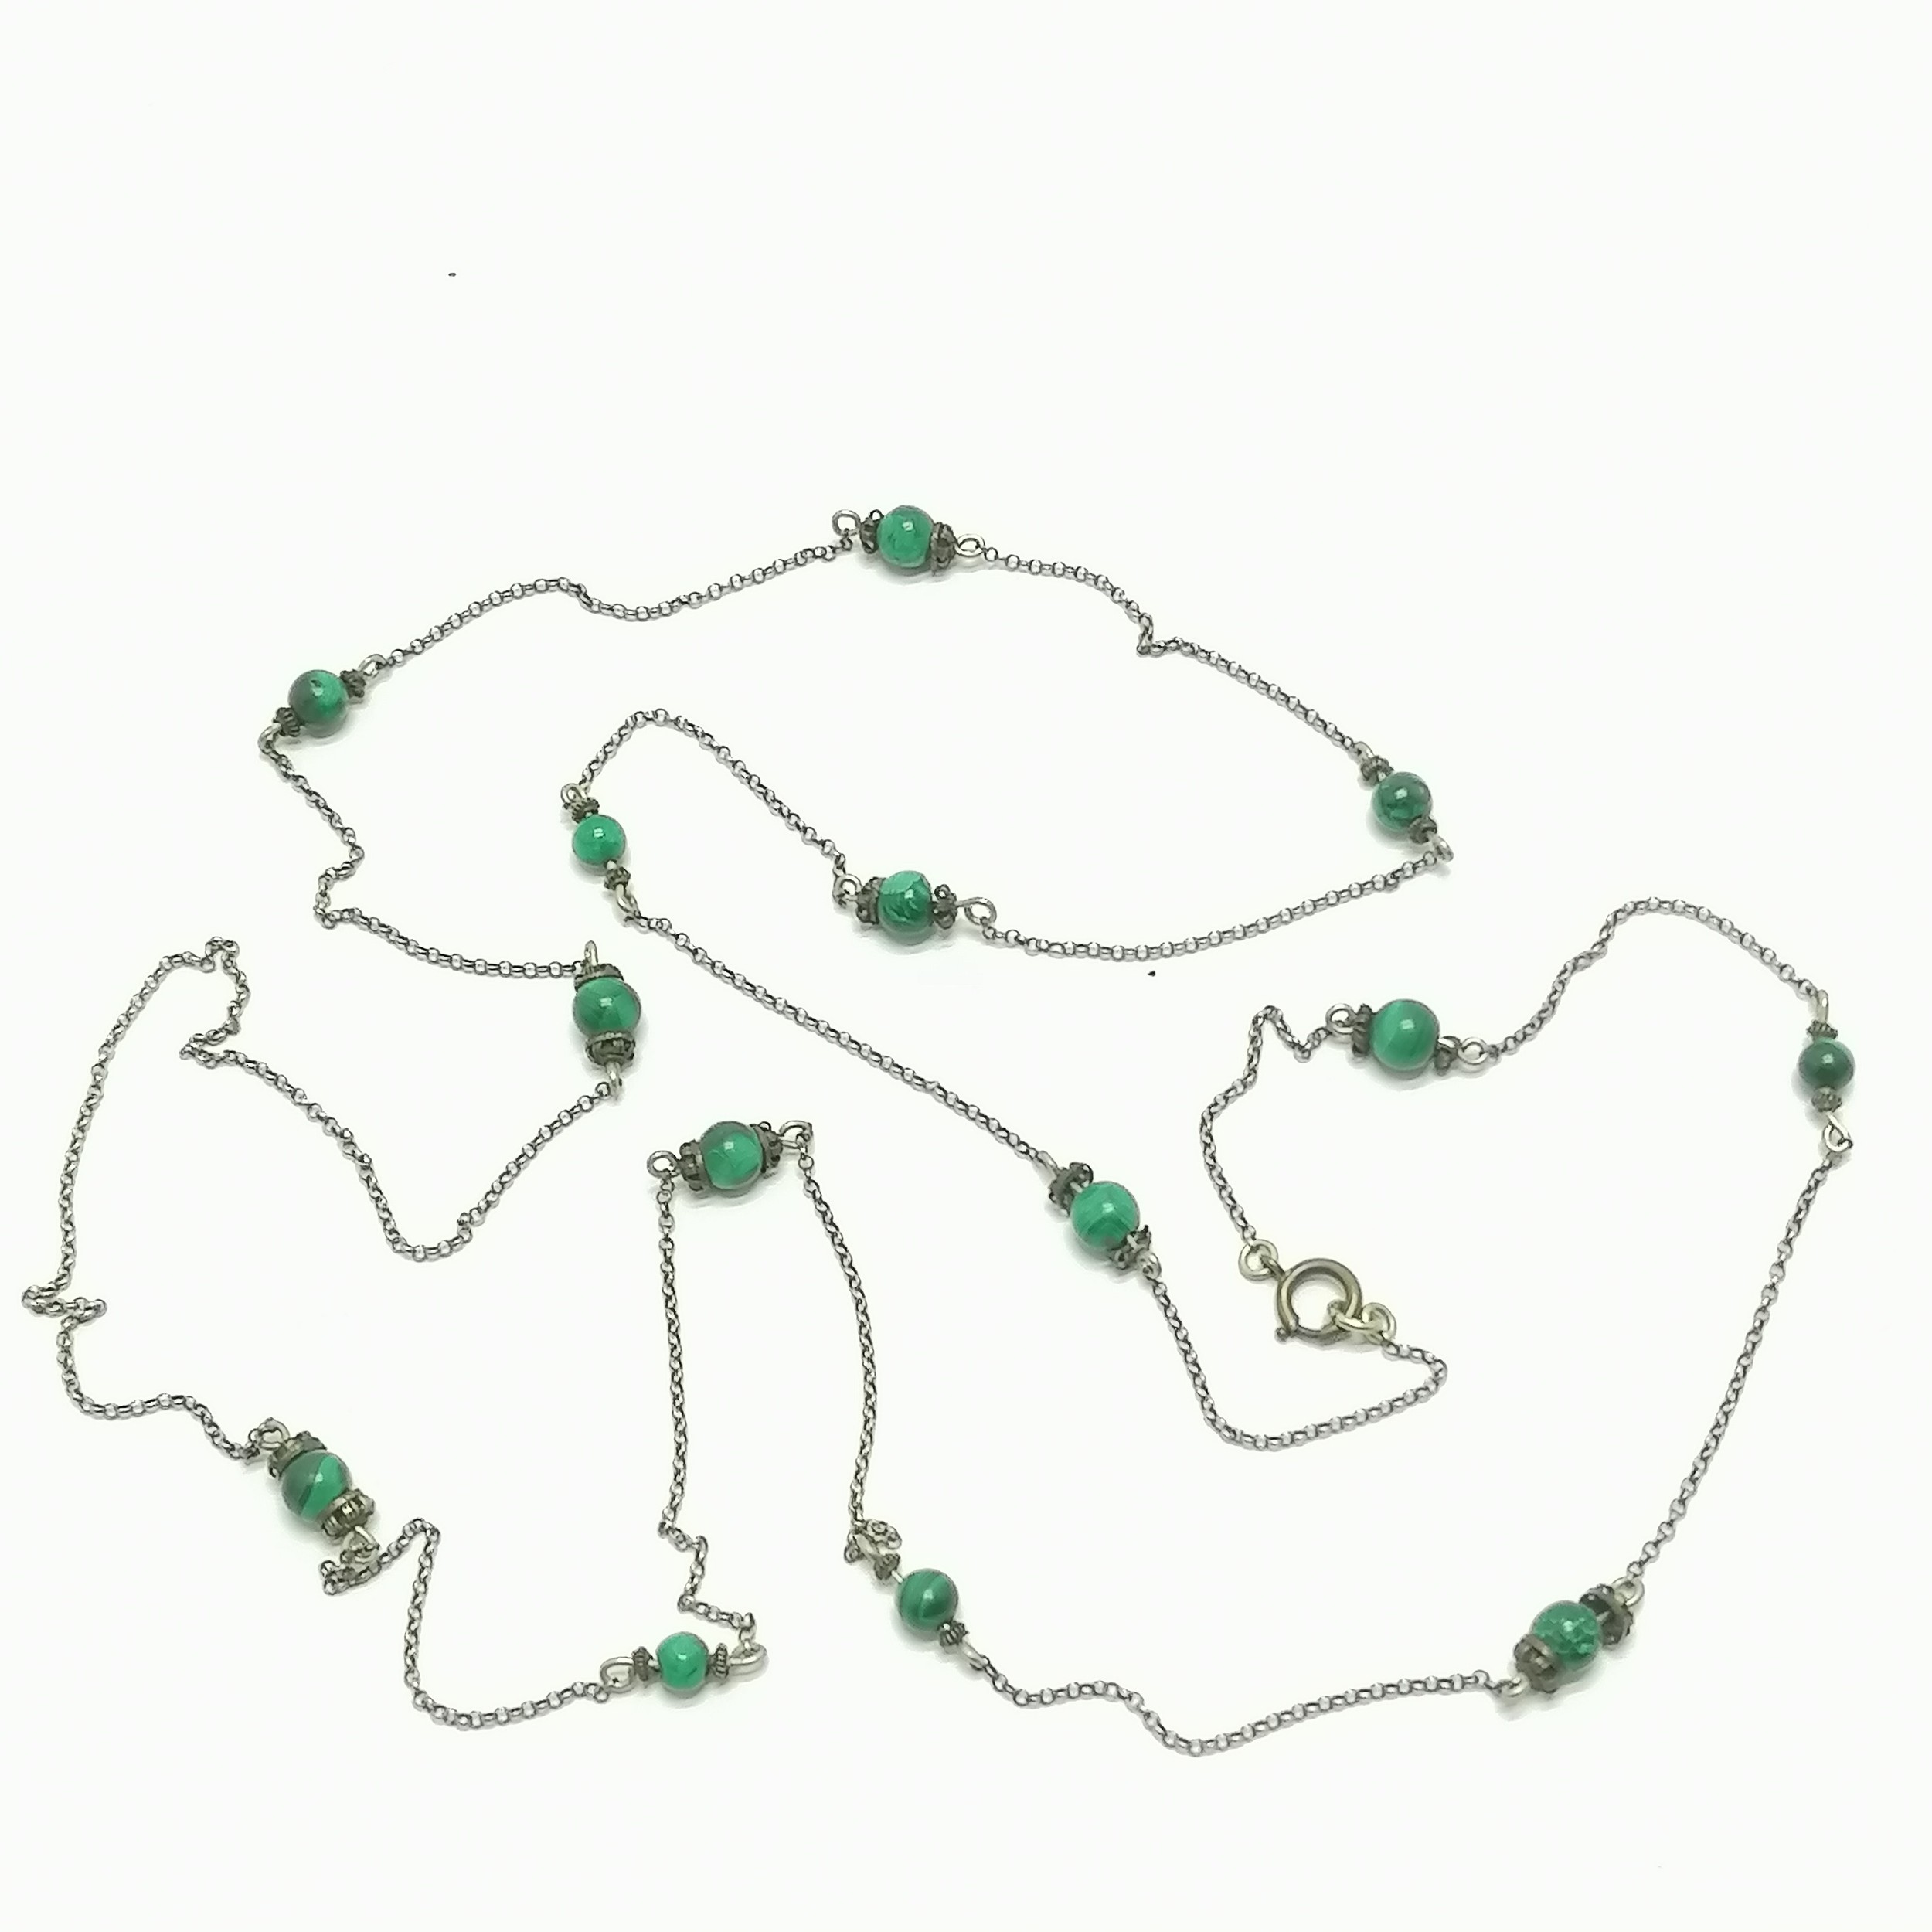 Antique unmarked silver languard chain with malachite bead detail - 138cm & 24g total weight ~ has - Image 2 of 2